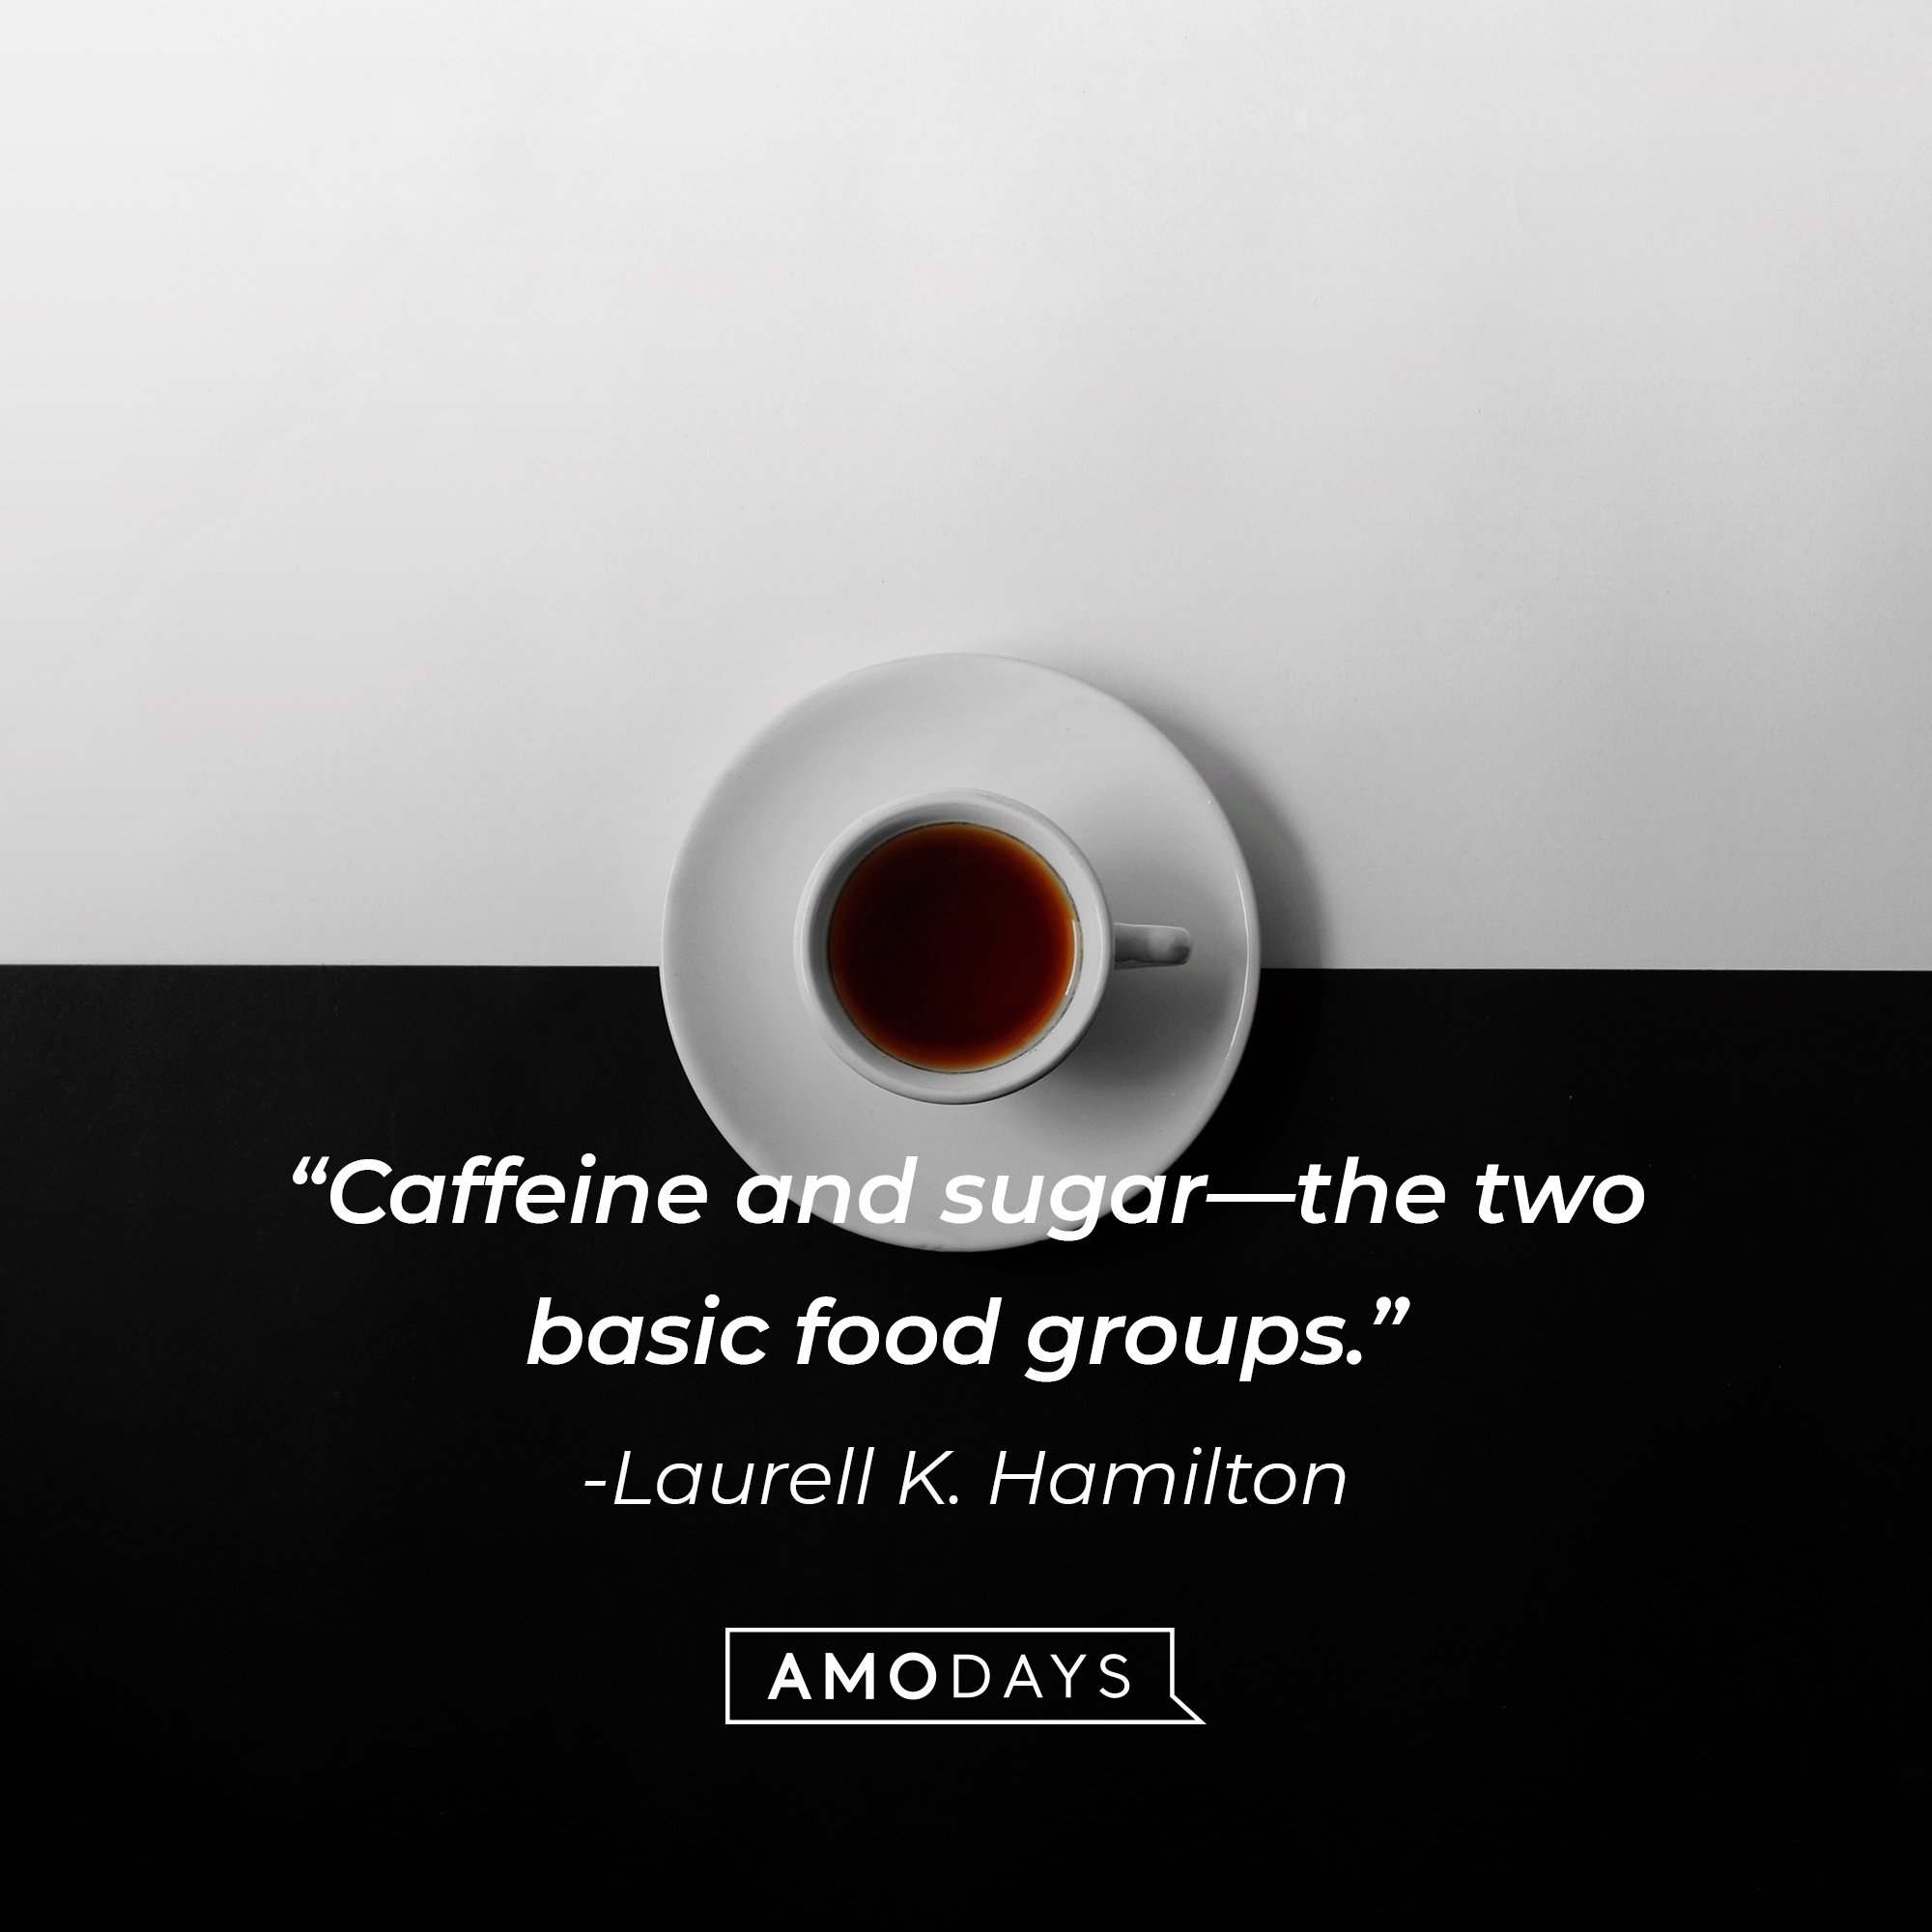 Laurell K. Hamilton's quote: "Caffeine and sugar—the two basic food groups." | Image: AmoDays